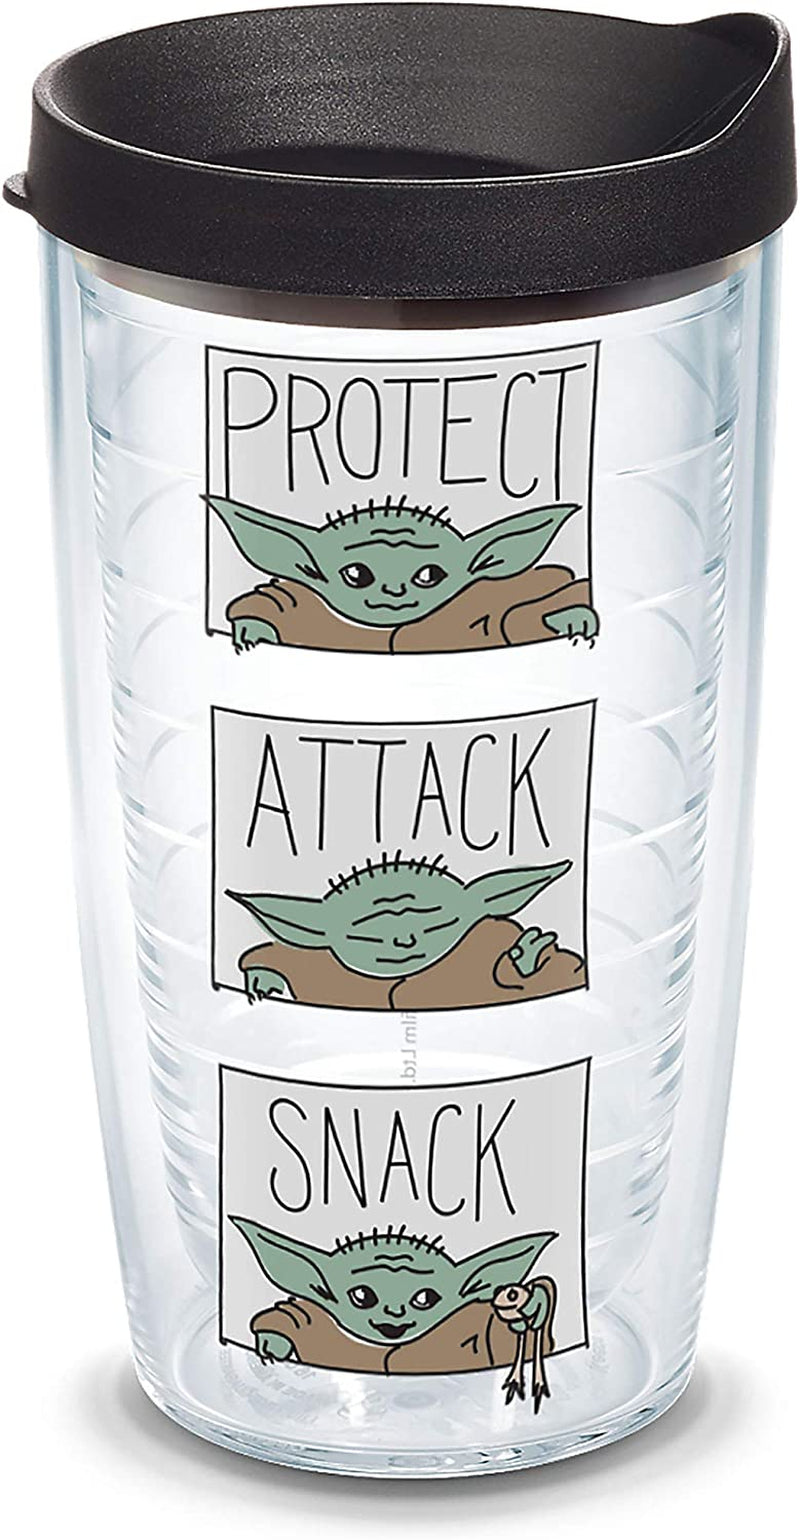 Tervis Triple Walled Star Wars - the Mandalorian Protect Attack Snack Insulated Tumbler Cup Keeps Drinks Cold & Hot, 20Oz - Stainless Steel, Stainless Steel